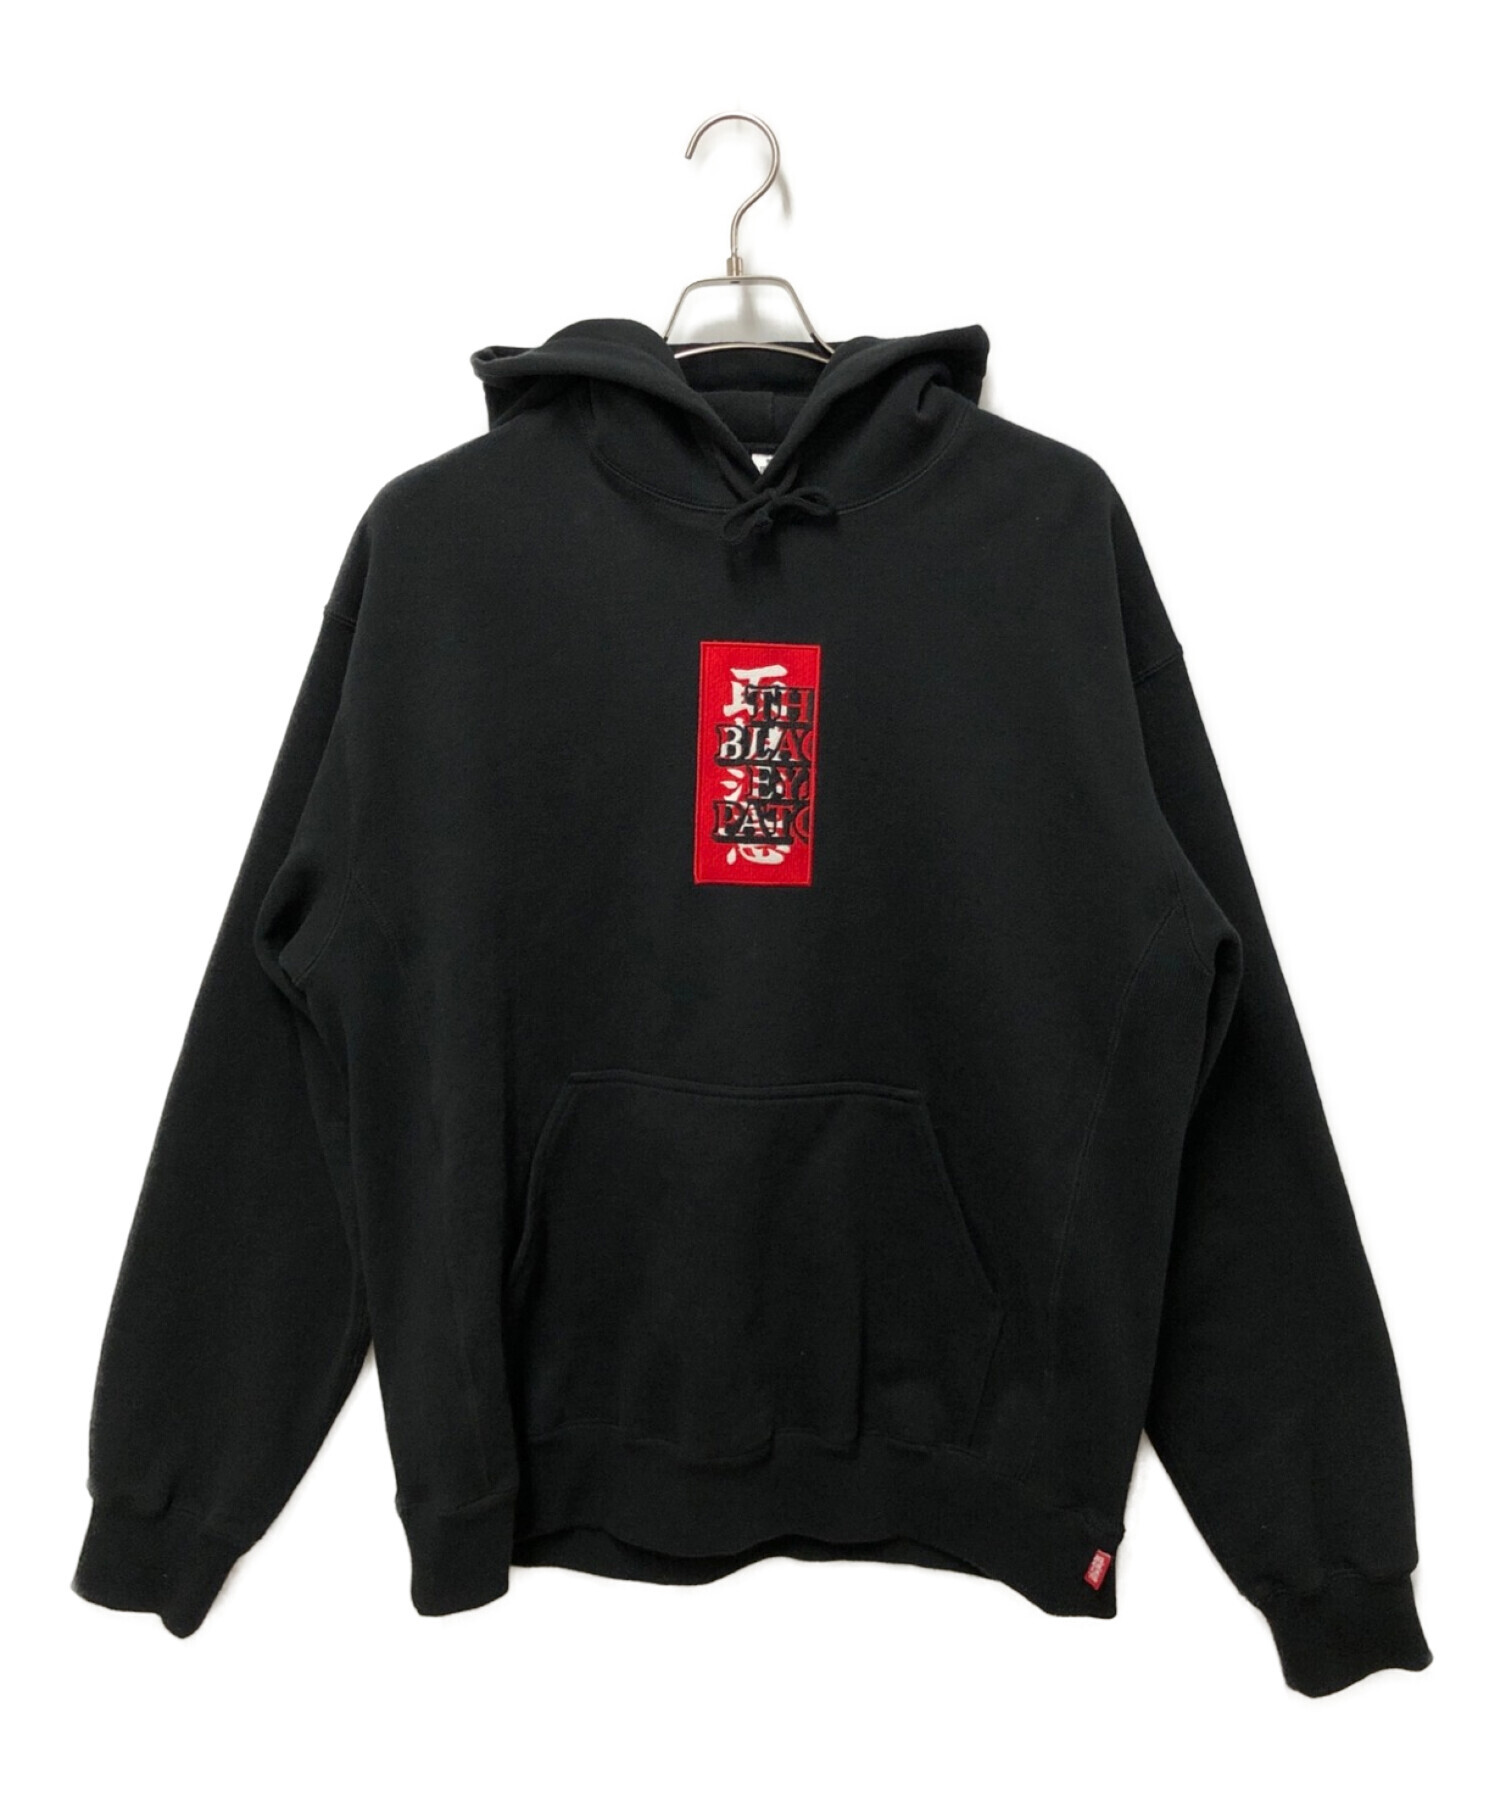 THE BLACK EYE PATCH   Hoodie   size Lパーカー